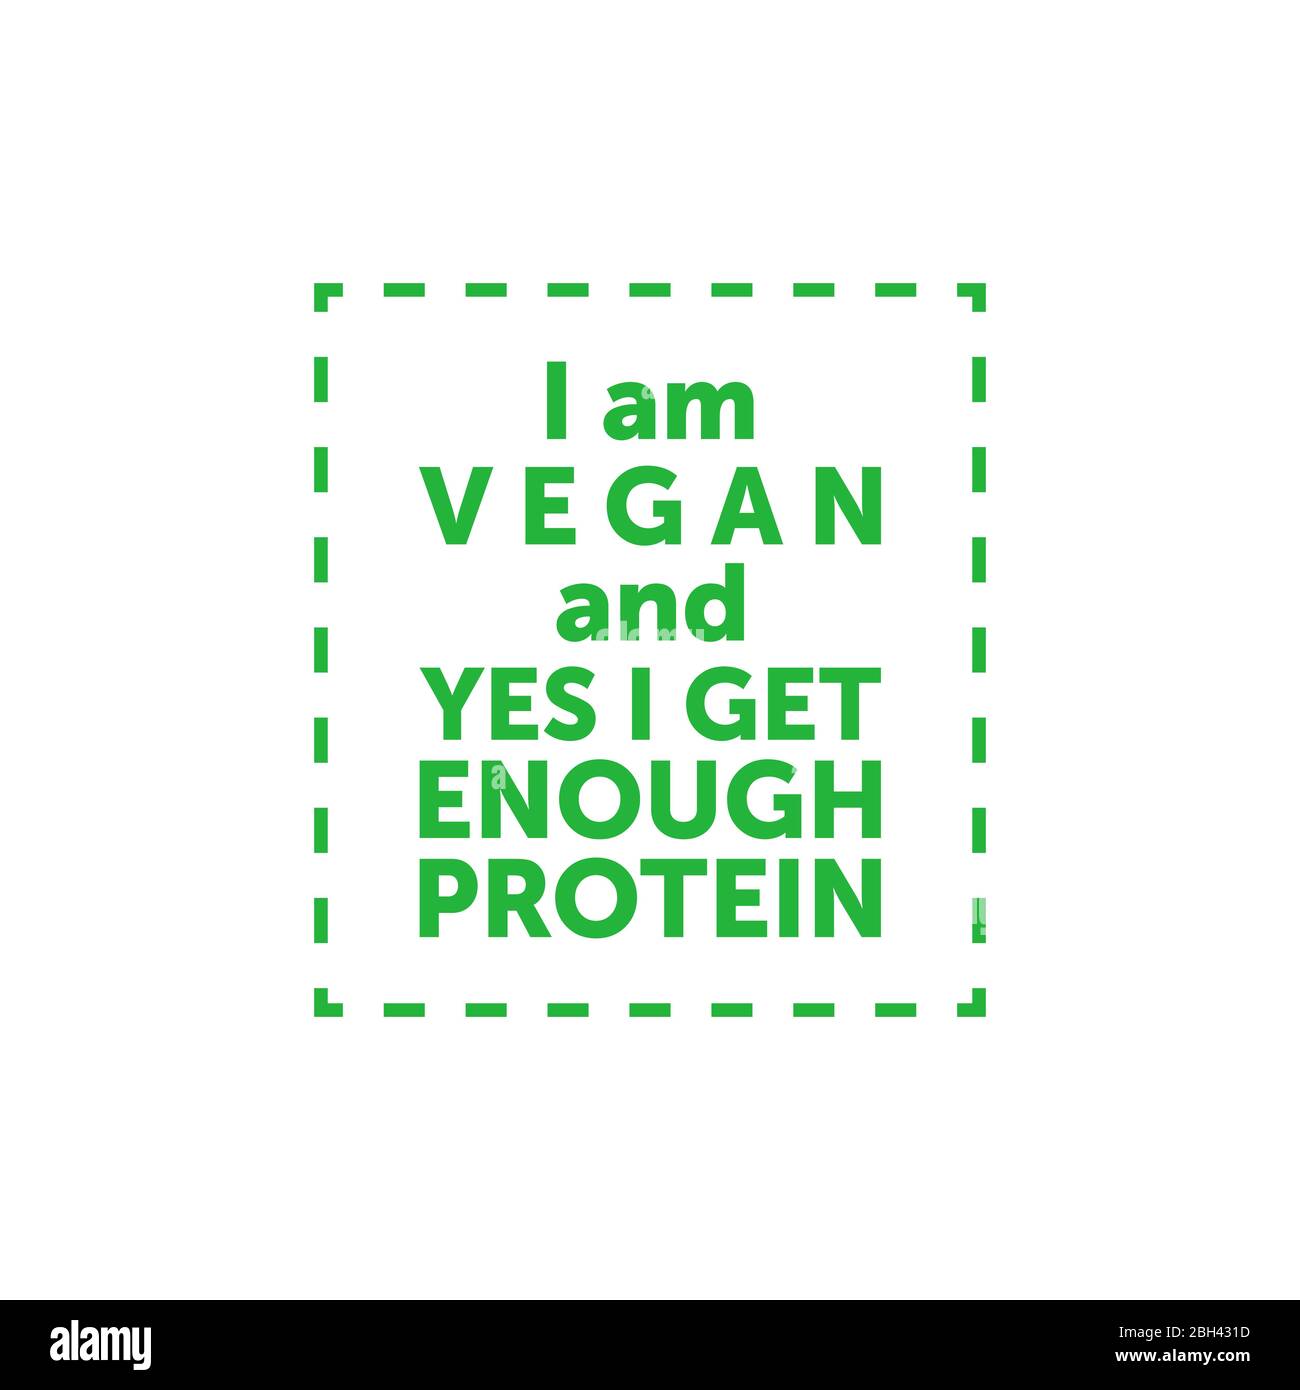 I am vegan and yes i get enough protein. Vegan title banner in dash line frame. Vector Stock Vector